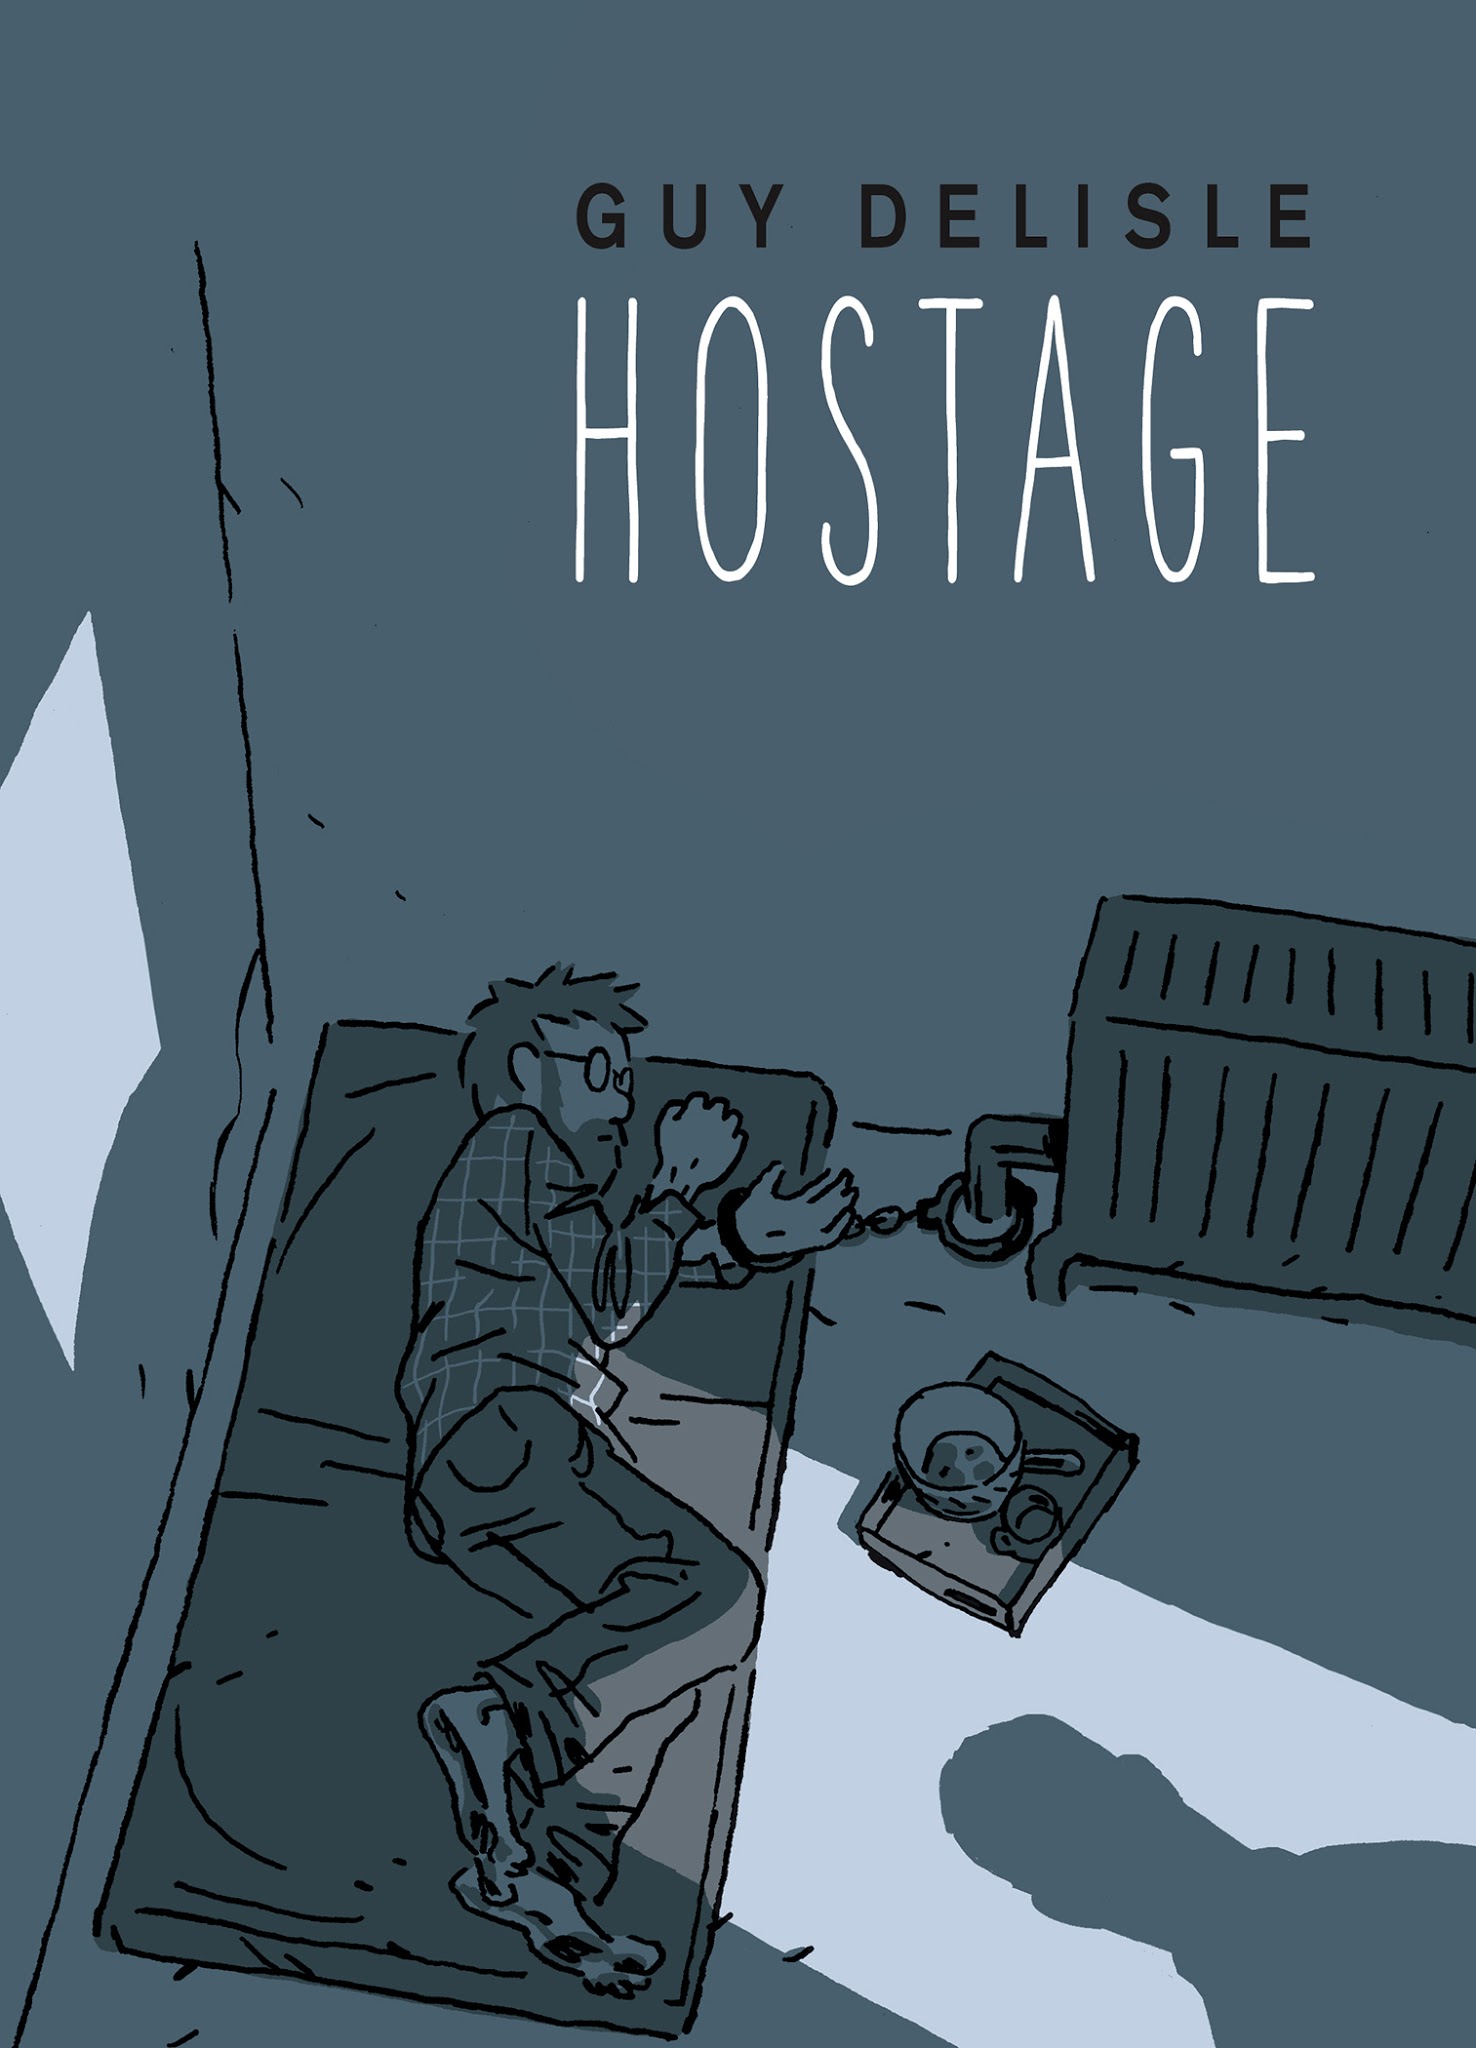 Read online Hostage comic -  Issue # TPB - 1